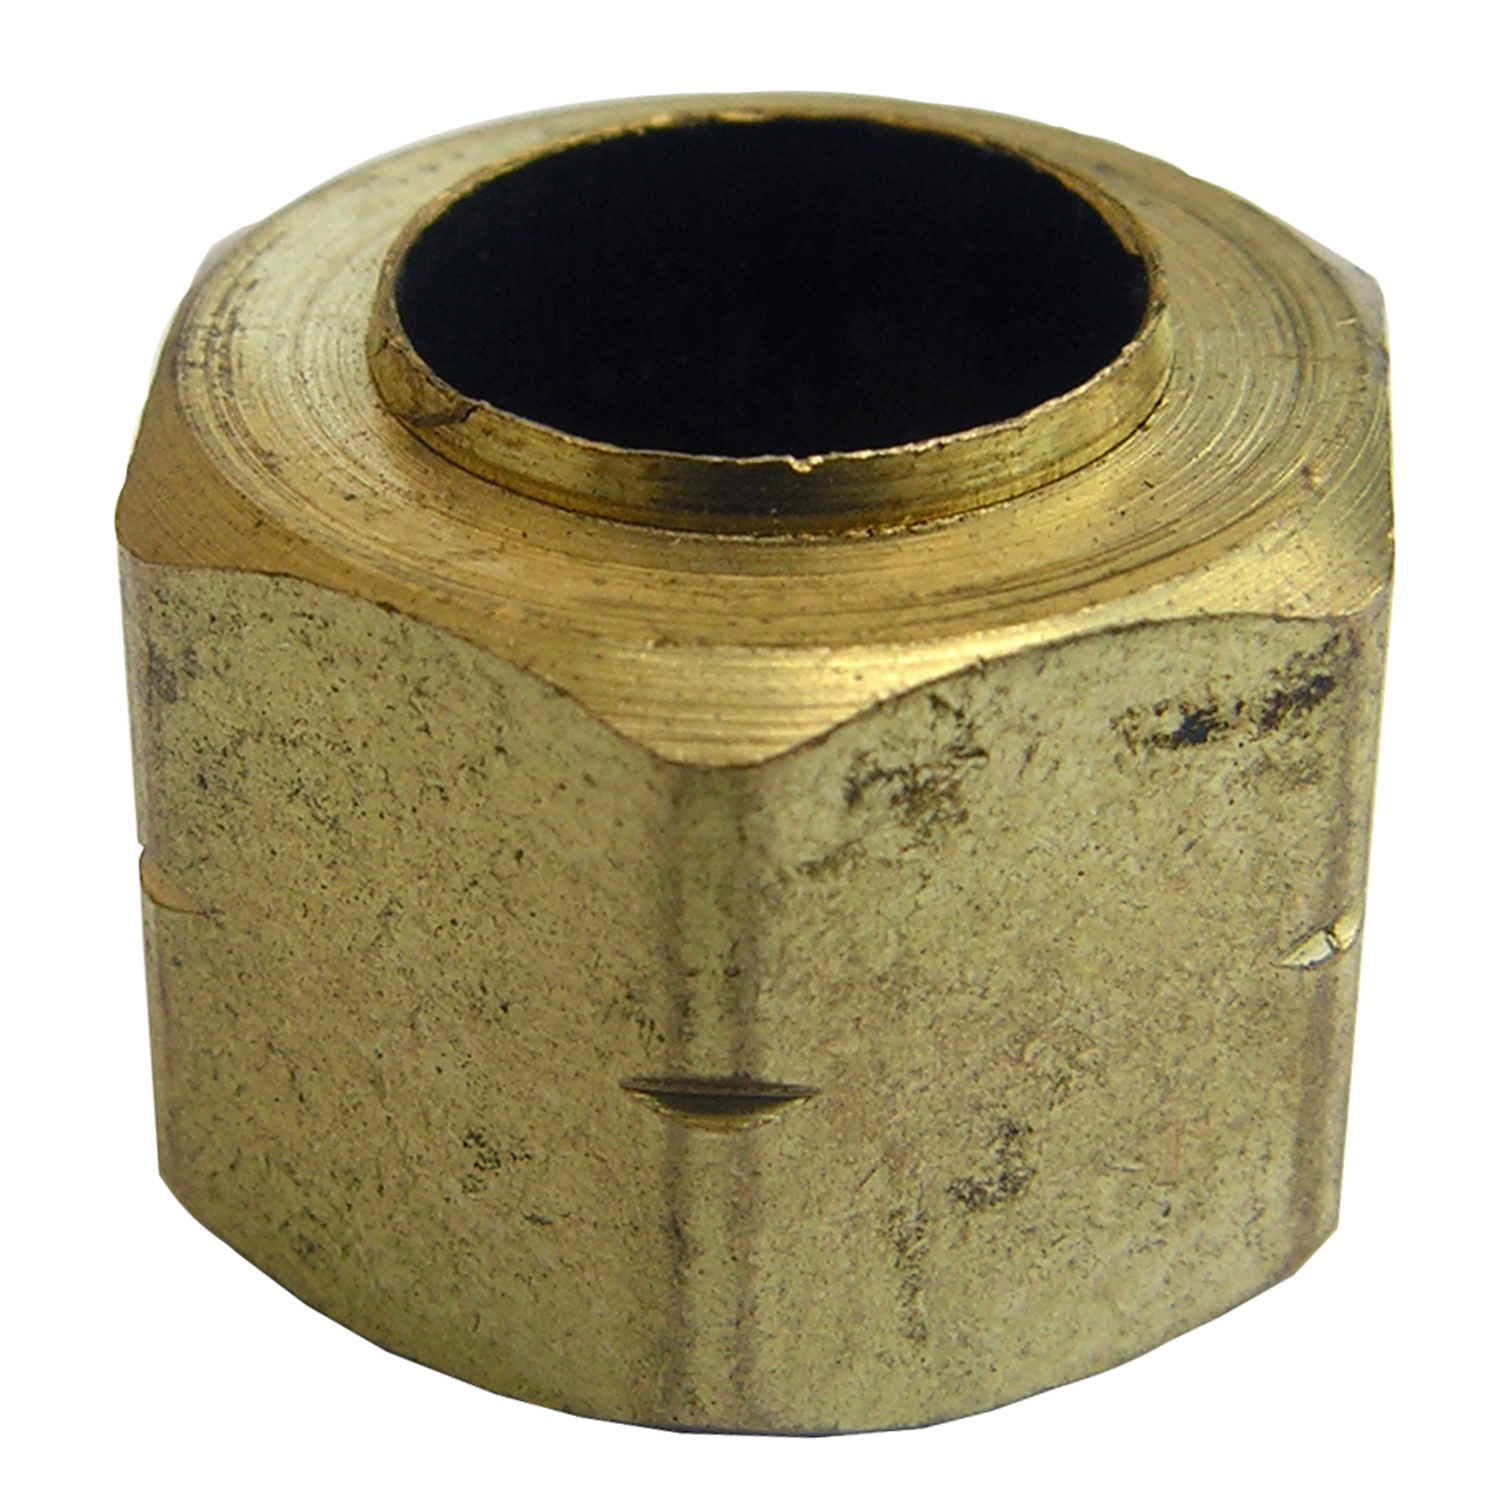 17-6117 Nut and Sleeve, 1/4 in, Compression, Brass